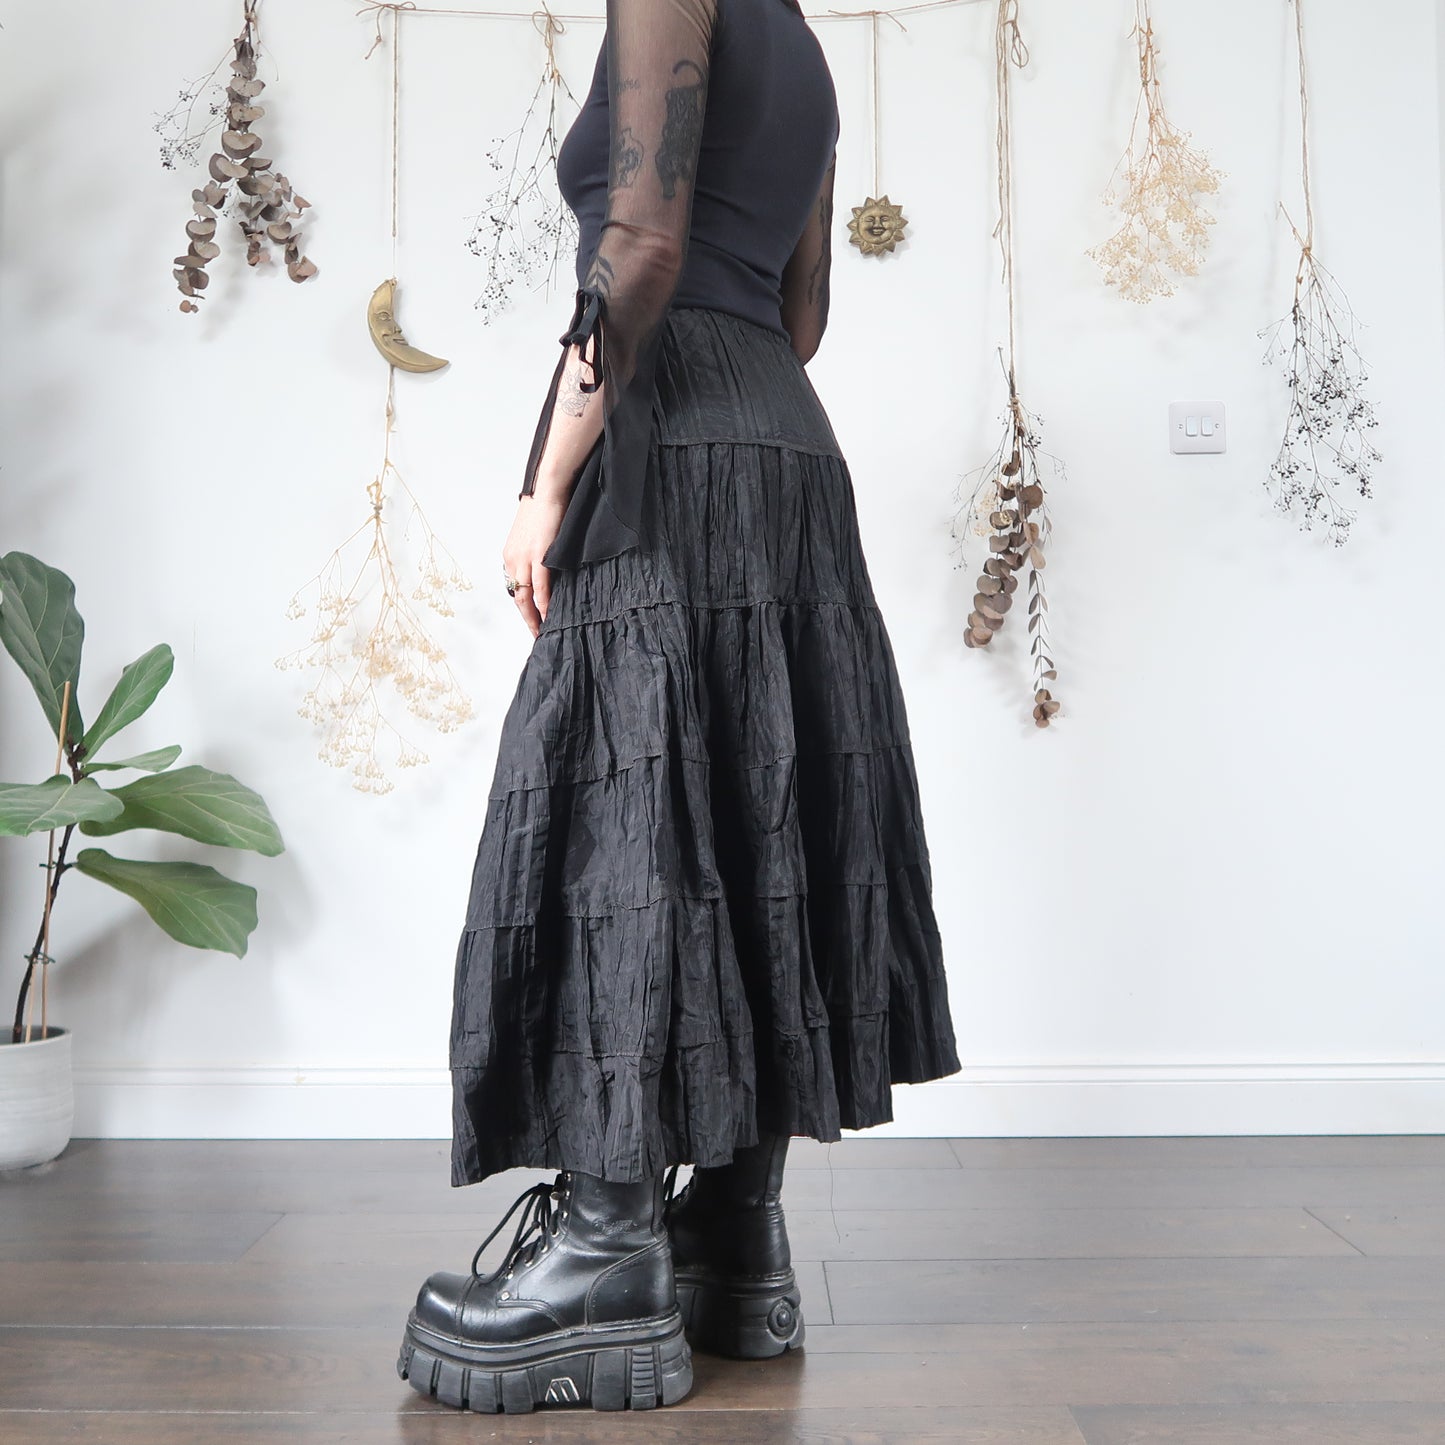 Black tiered skirt - size S/M